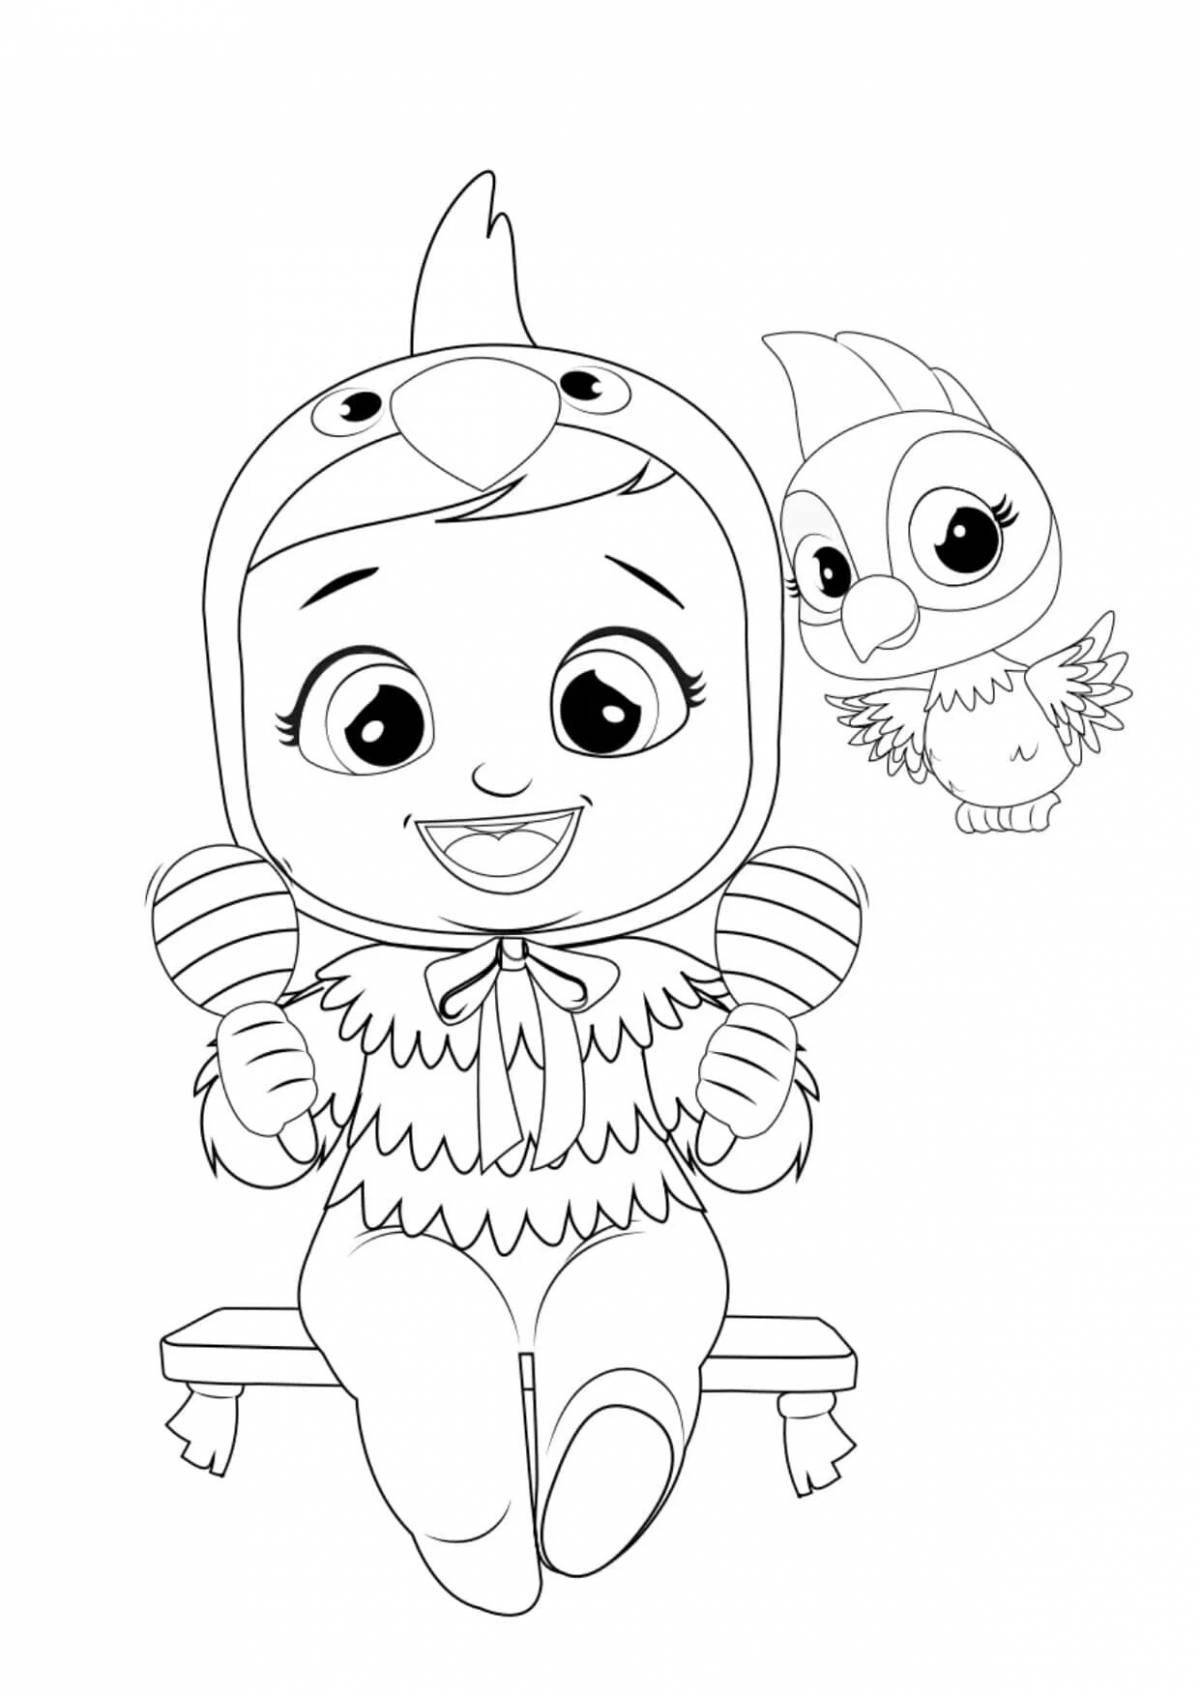 Crybaby animated coloring page